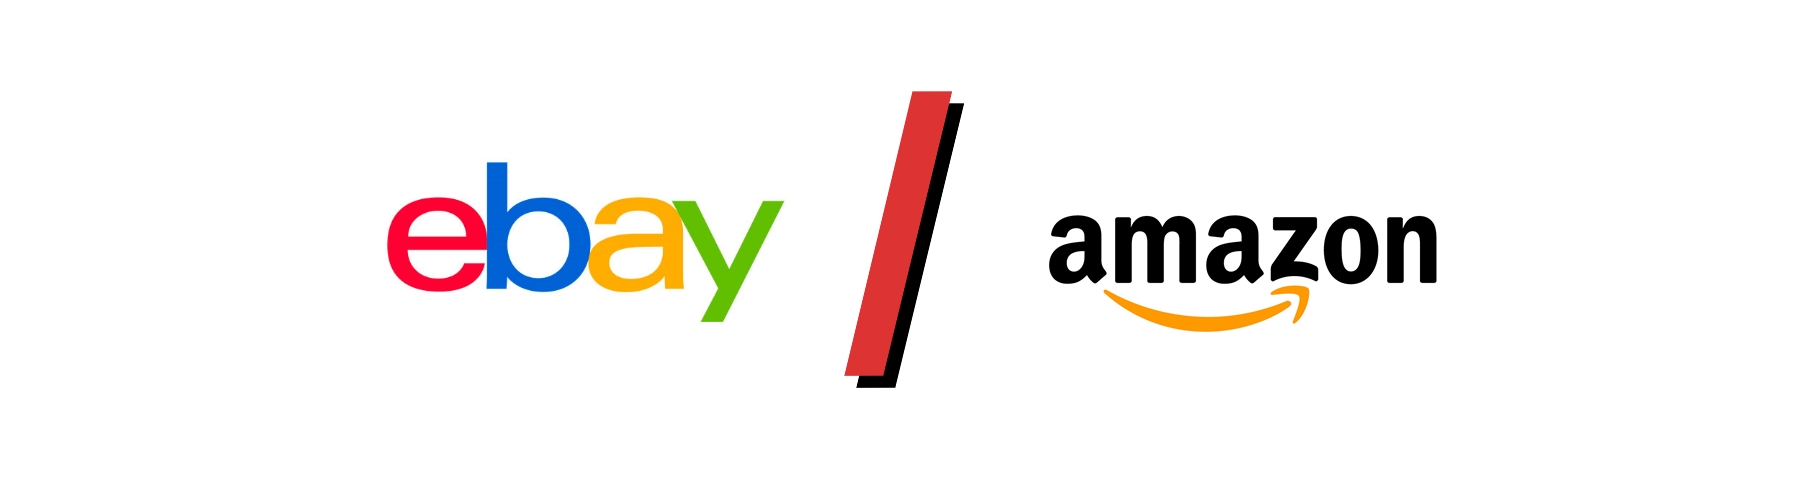 Sell products as a bundle on Amazon and eBay